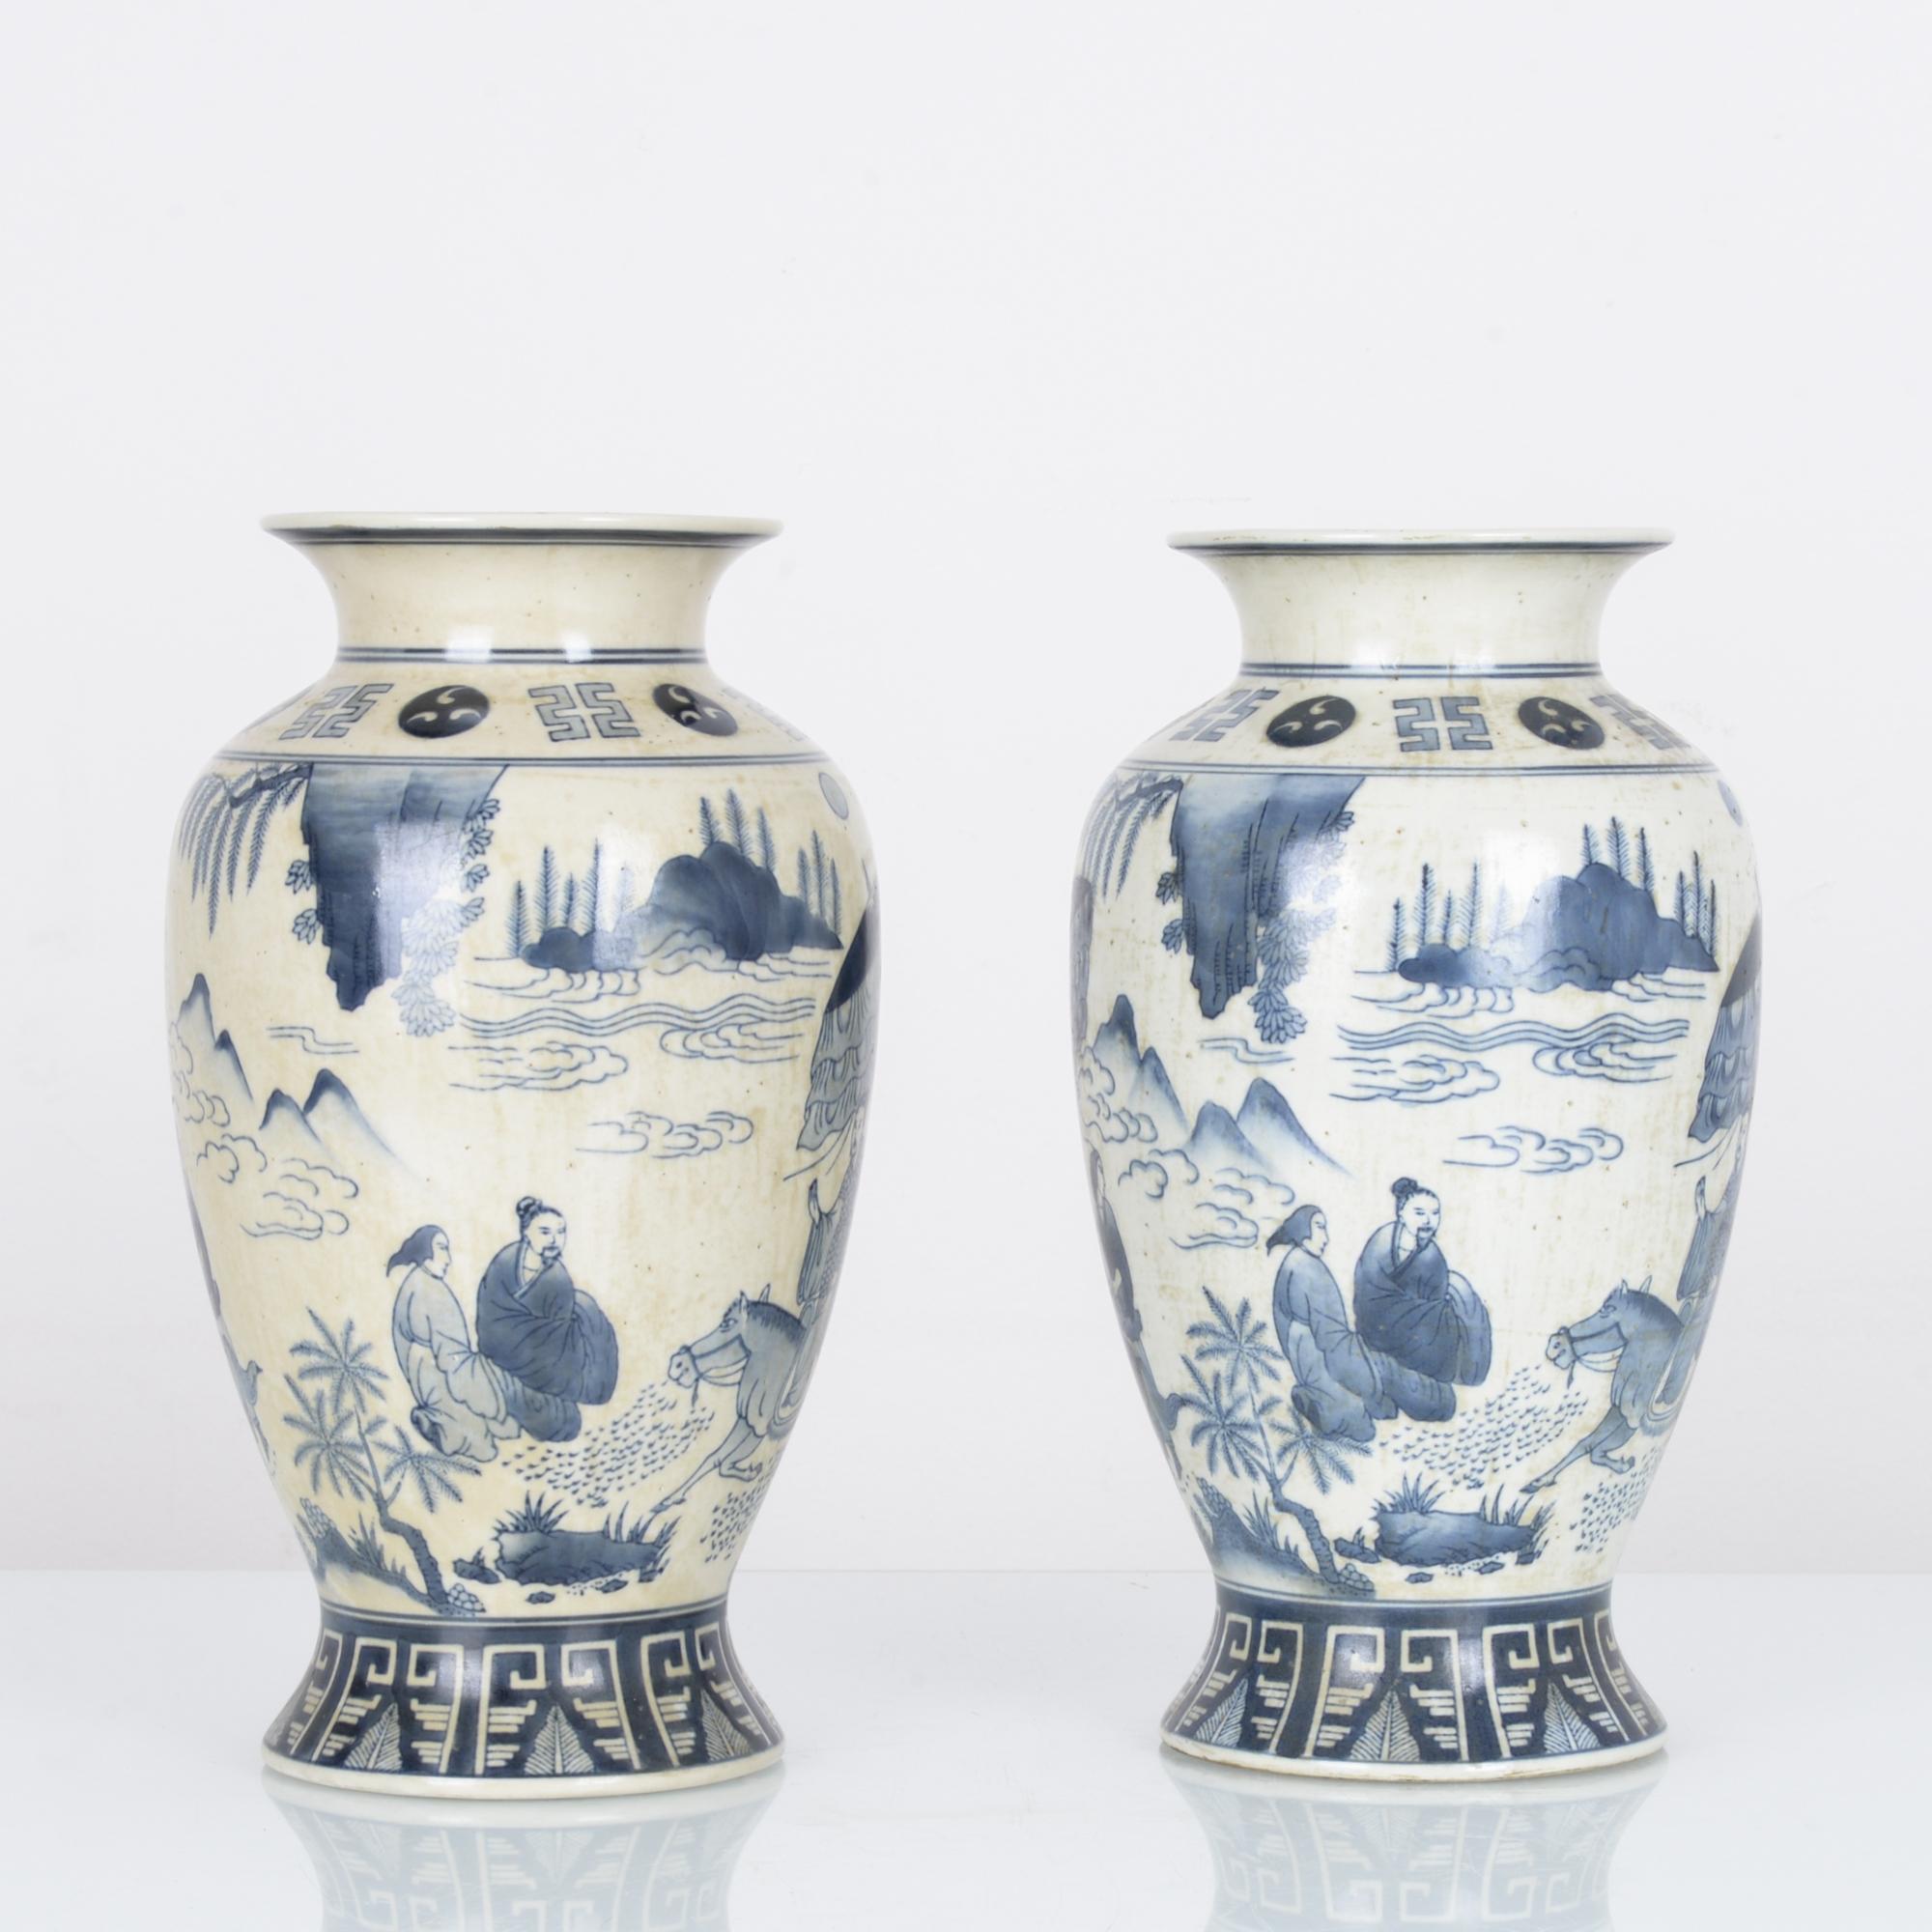 A pair of matching 33 cm blue and white painted vases, produced in China circa 1920. With a scene of the end of a pilgrimage, this harmonious set of aged porcelain vases imbue a sense of peace wherever they’re placed.